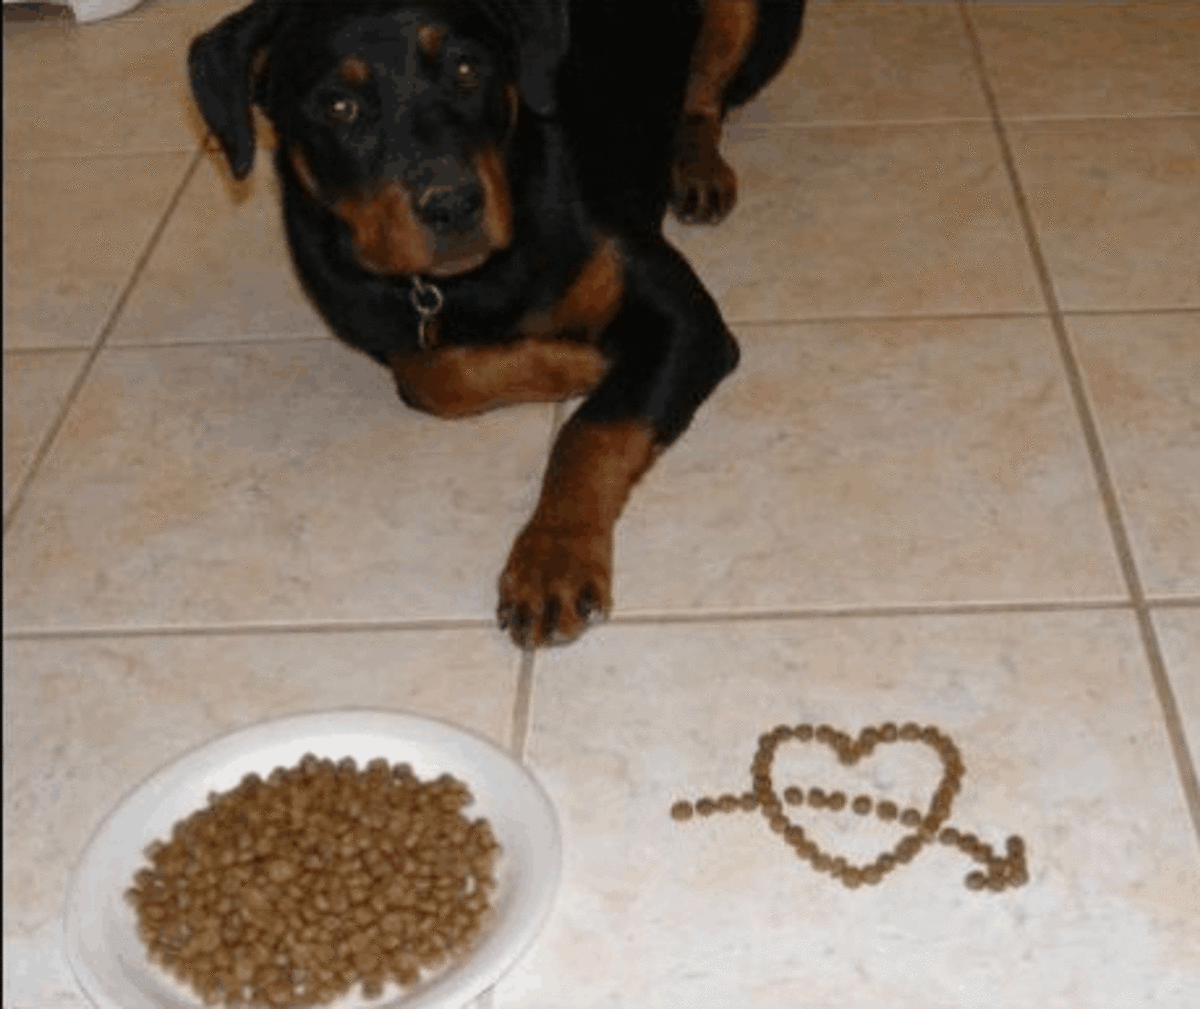 Dog Aggression: The Role of Nutrition